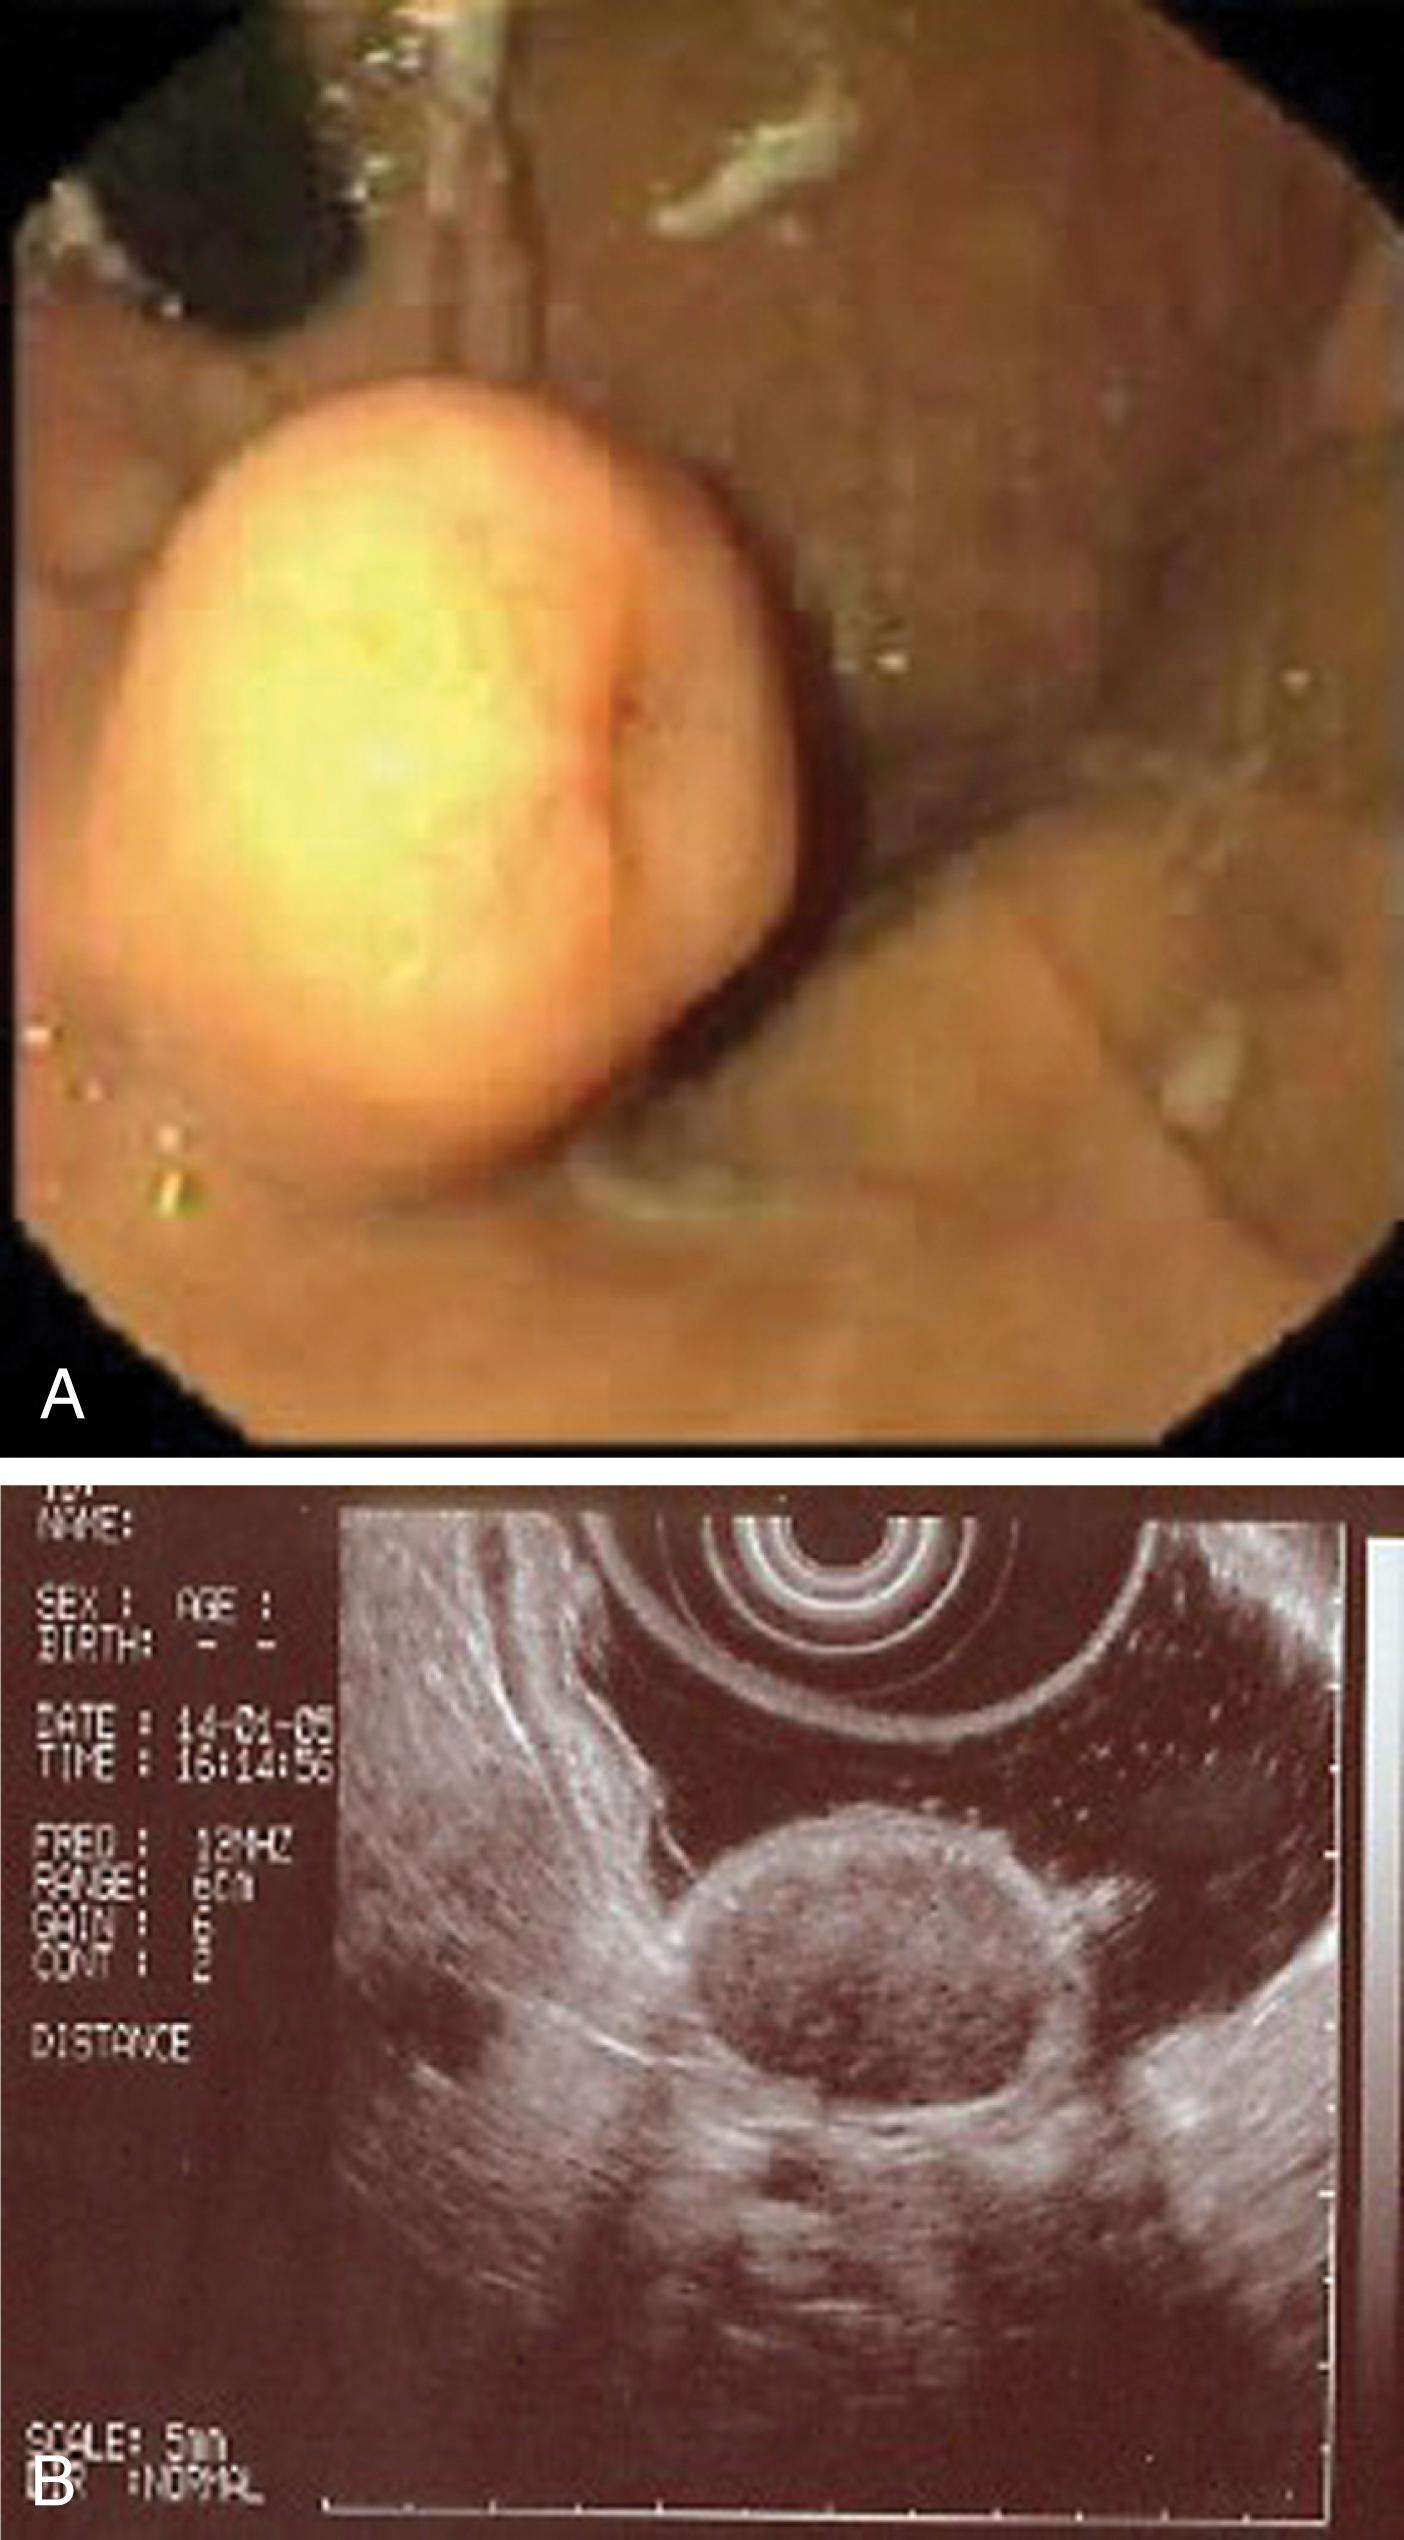 Fig. 14.9, (A) Endoscopic view of a 2-cm diameter polypoid submucosal gastric lesion. (B) EUS confirms the lesion is arising from the muscularis propria and likely to be a gastrointestinal stromal tumour.